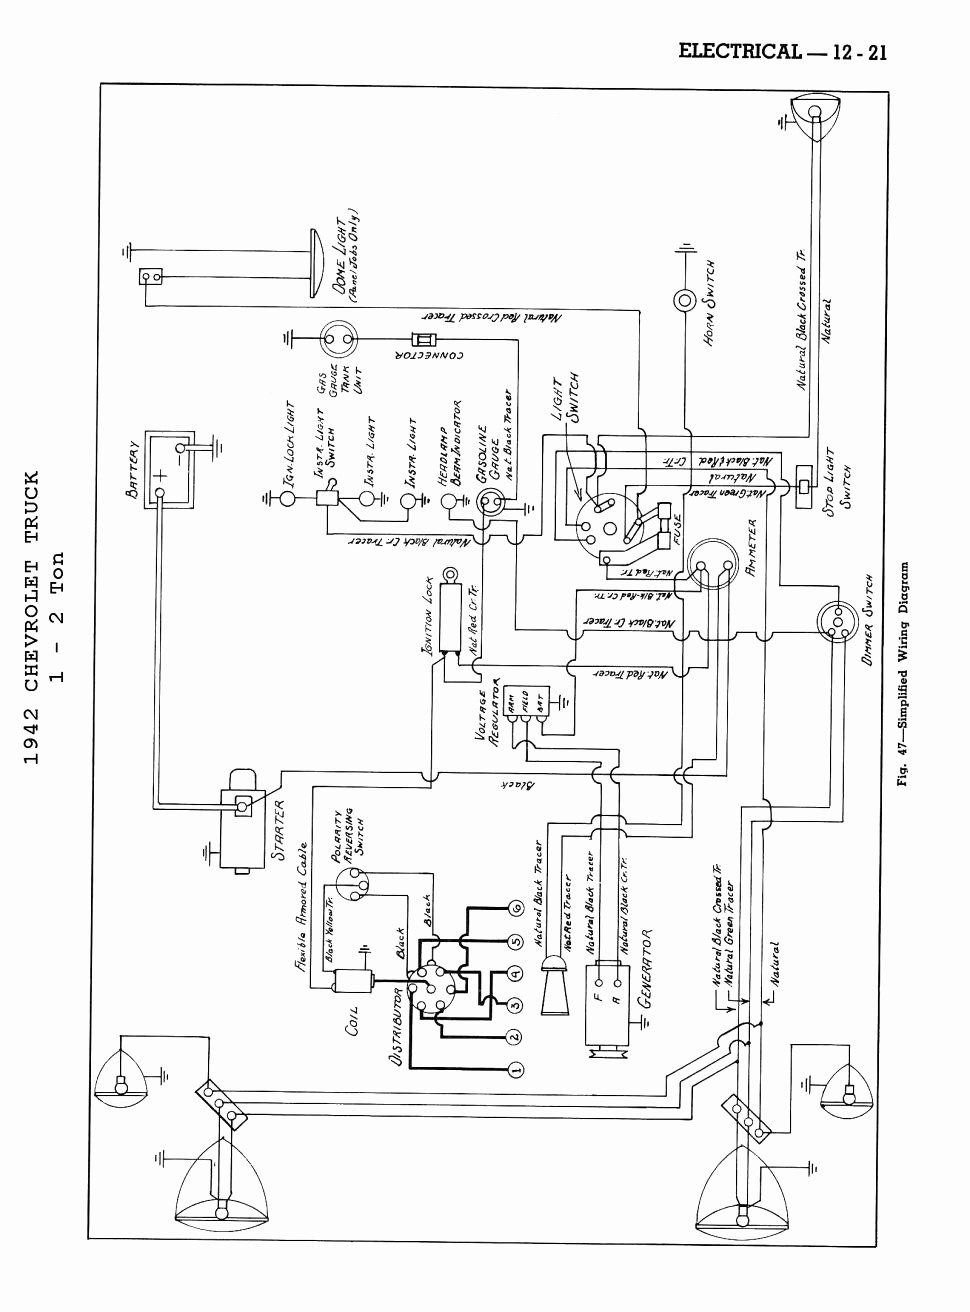 Full Size of Wiring Diagram Atwood Furnace Wiring Diagram Elegant Wiring Diagram For Suburban Rv